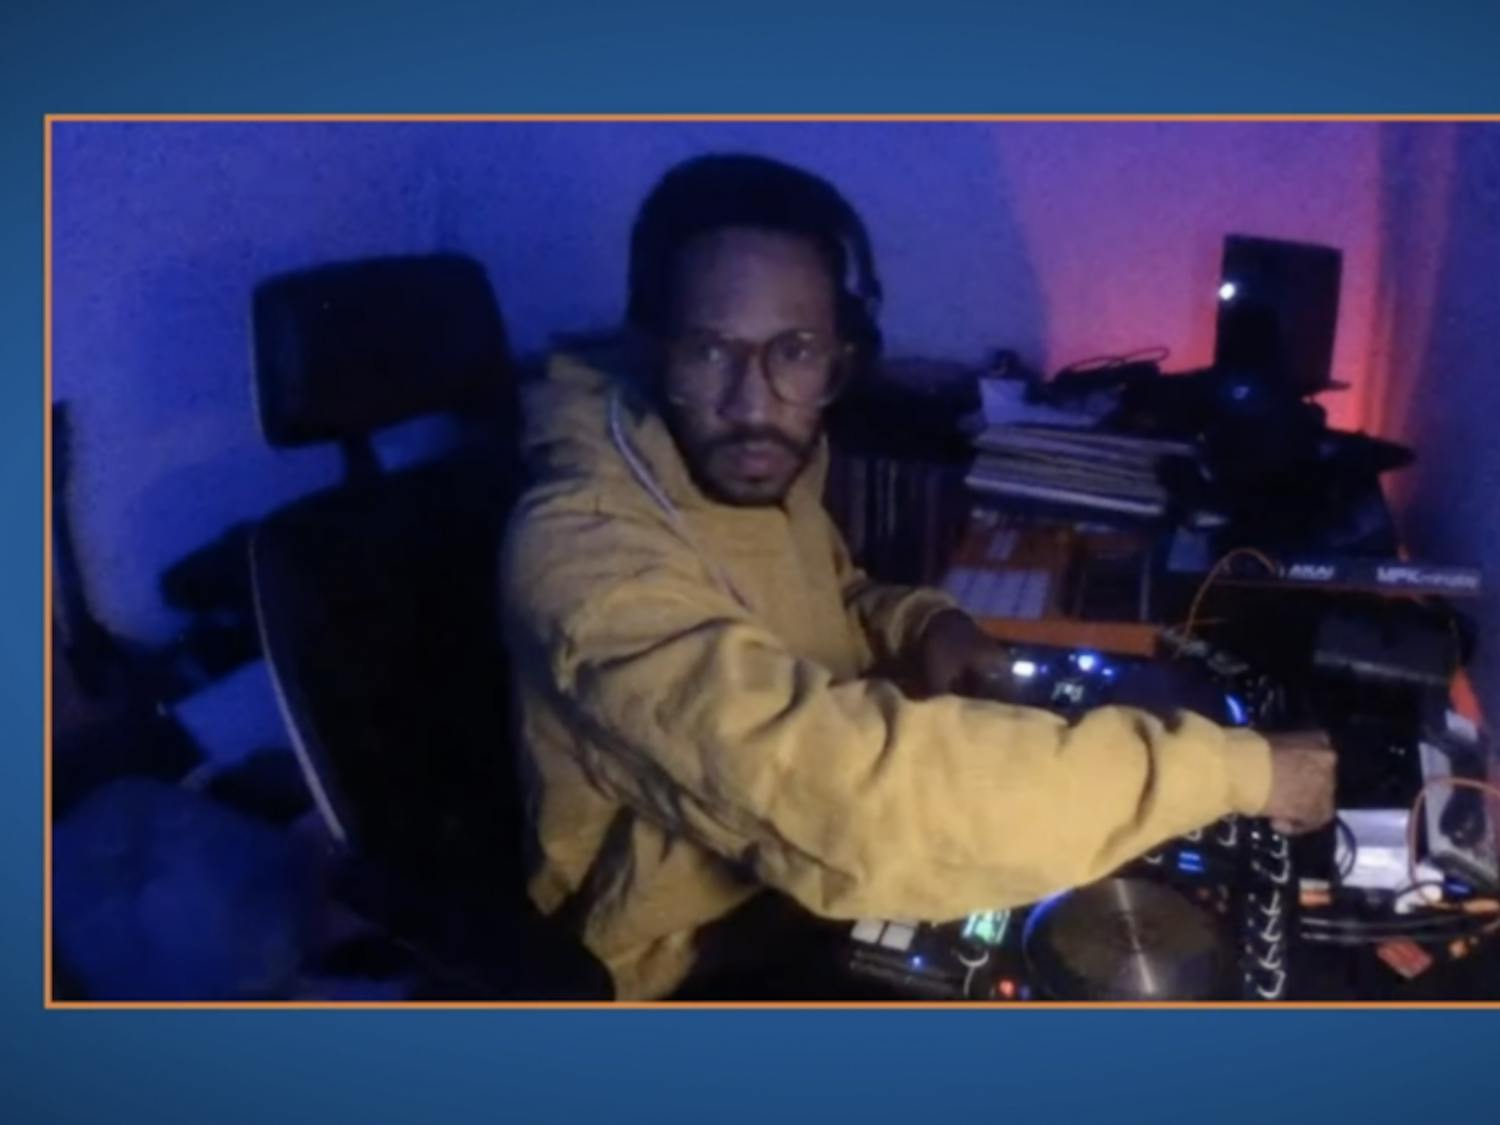 Viewers tuned in to a Wednesday night Vimeo live stream of the show, which featured Haitian-Canadian DJ Kaytranada and New Orleans R&amp;B artist Lucky Daye.